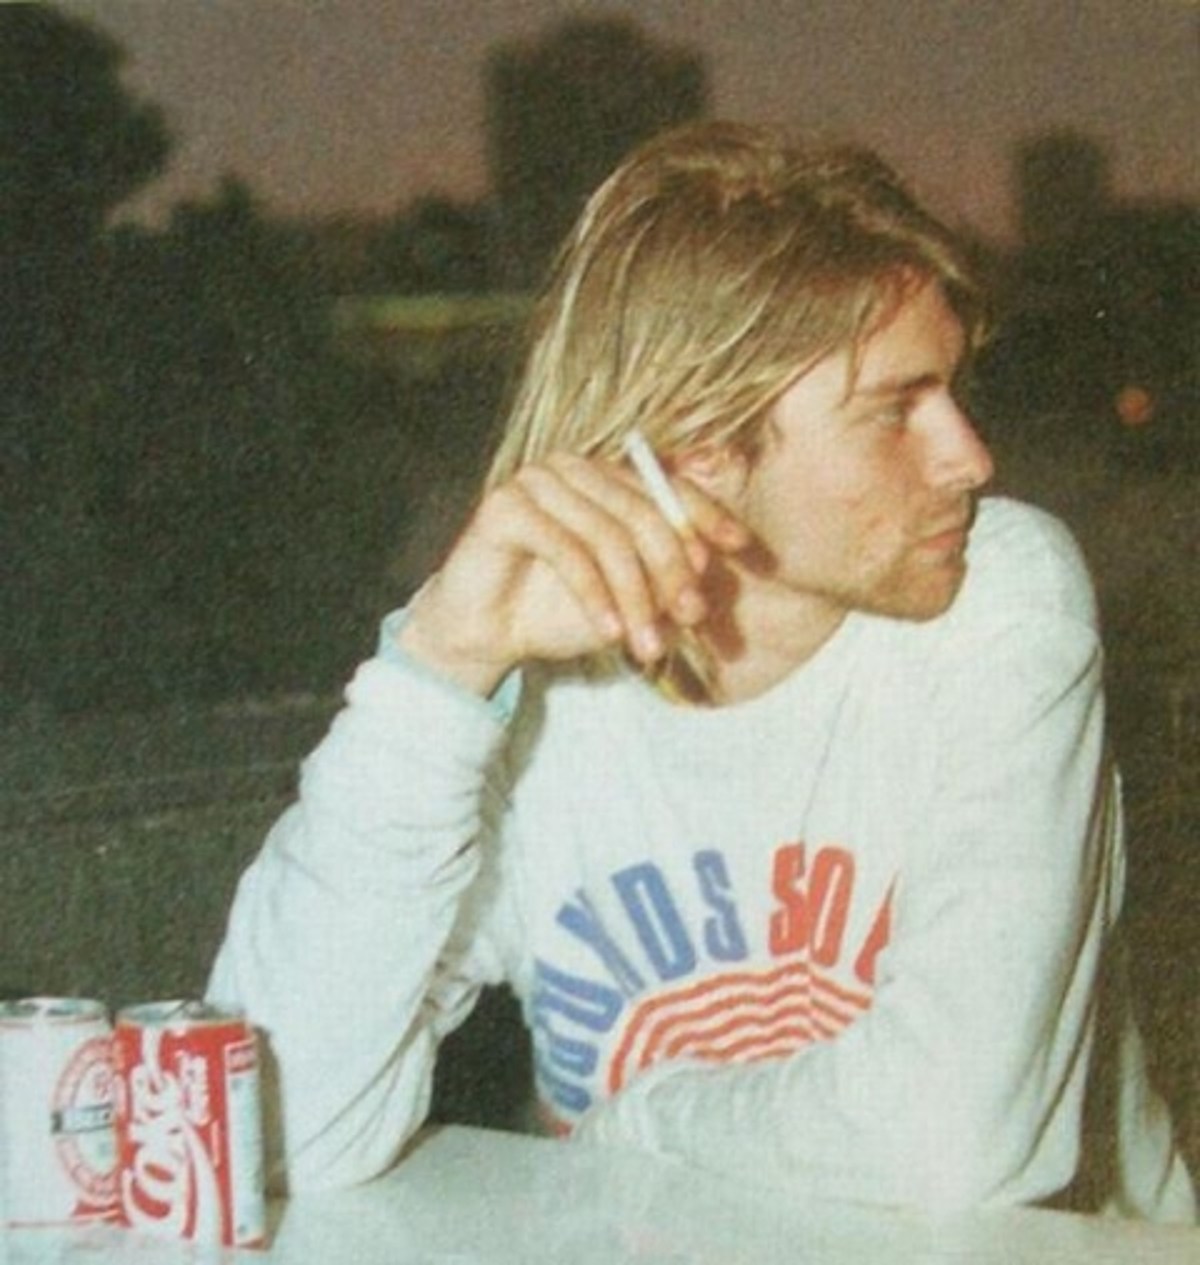 listen to an unearthed recording of Kurt Cobain covering The Beatles' “And  I Love Her”